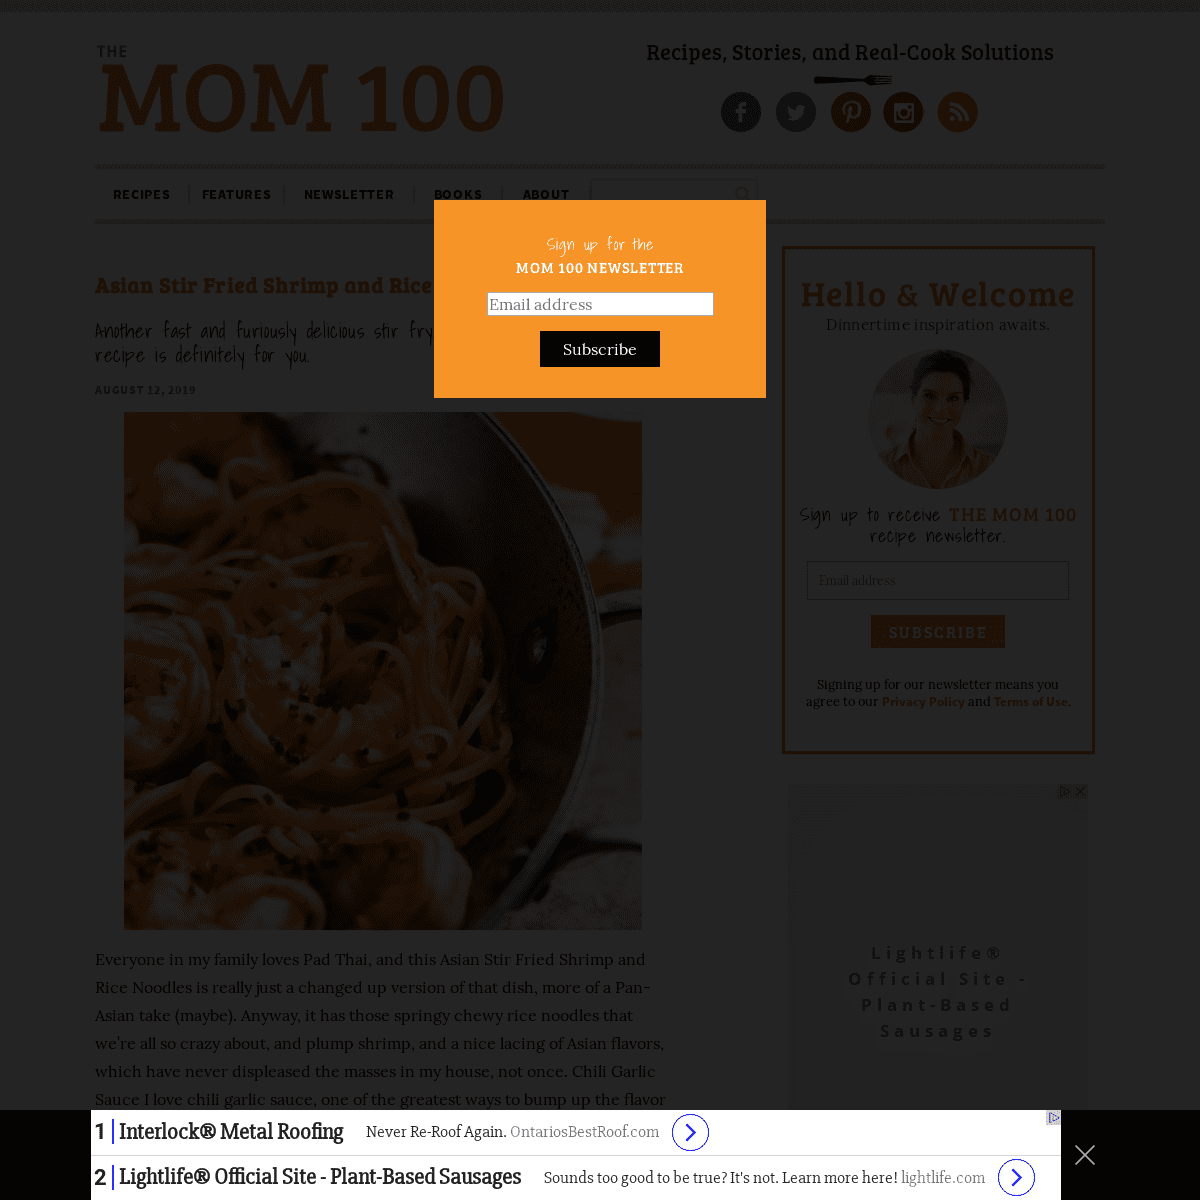 The Mom 100 — Recipes, Stories, and Real-Cook Solutions